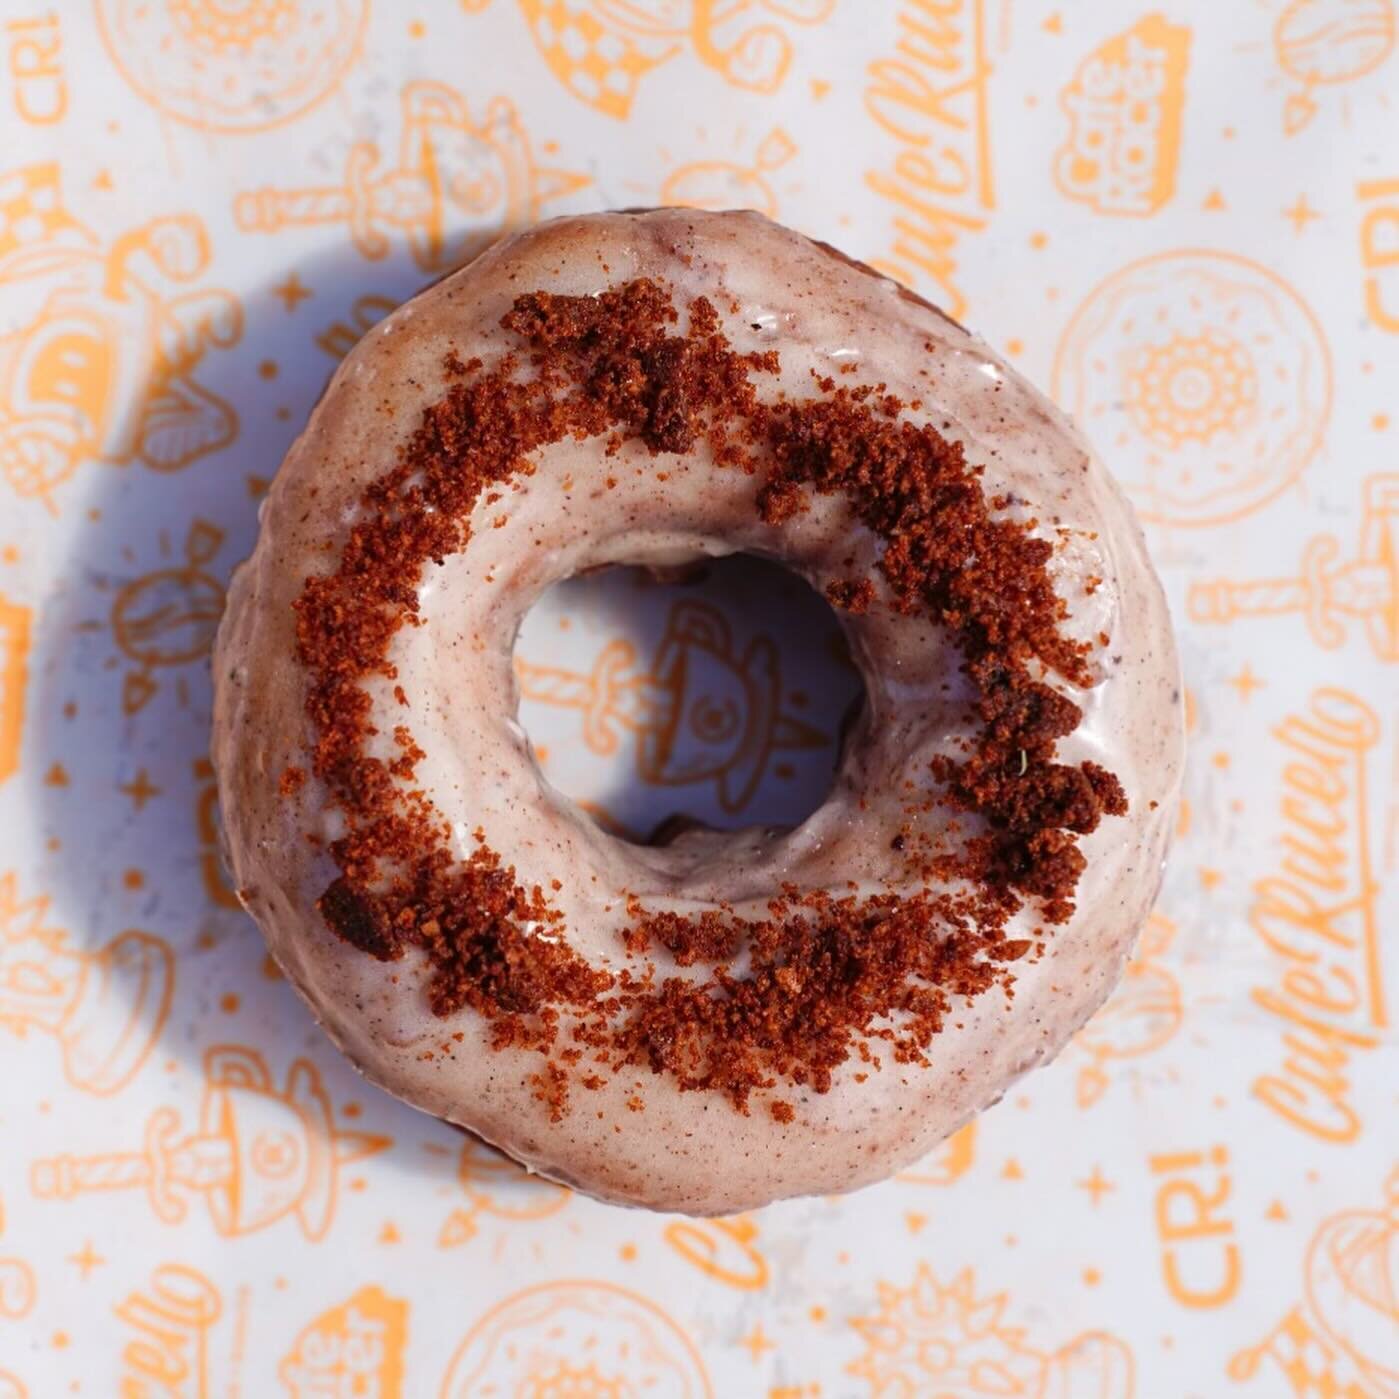 March madness &gt; winter sadness ⚡️Time for a little spring cleaning + the old donut flavors have GOT TO GO ⚡️We&rsquo;re super stoked to be dropping a new donut menu tomorrow &mdash; Tuesday March 19 &mdash; featuring loads of new nuts + some old f